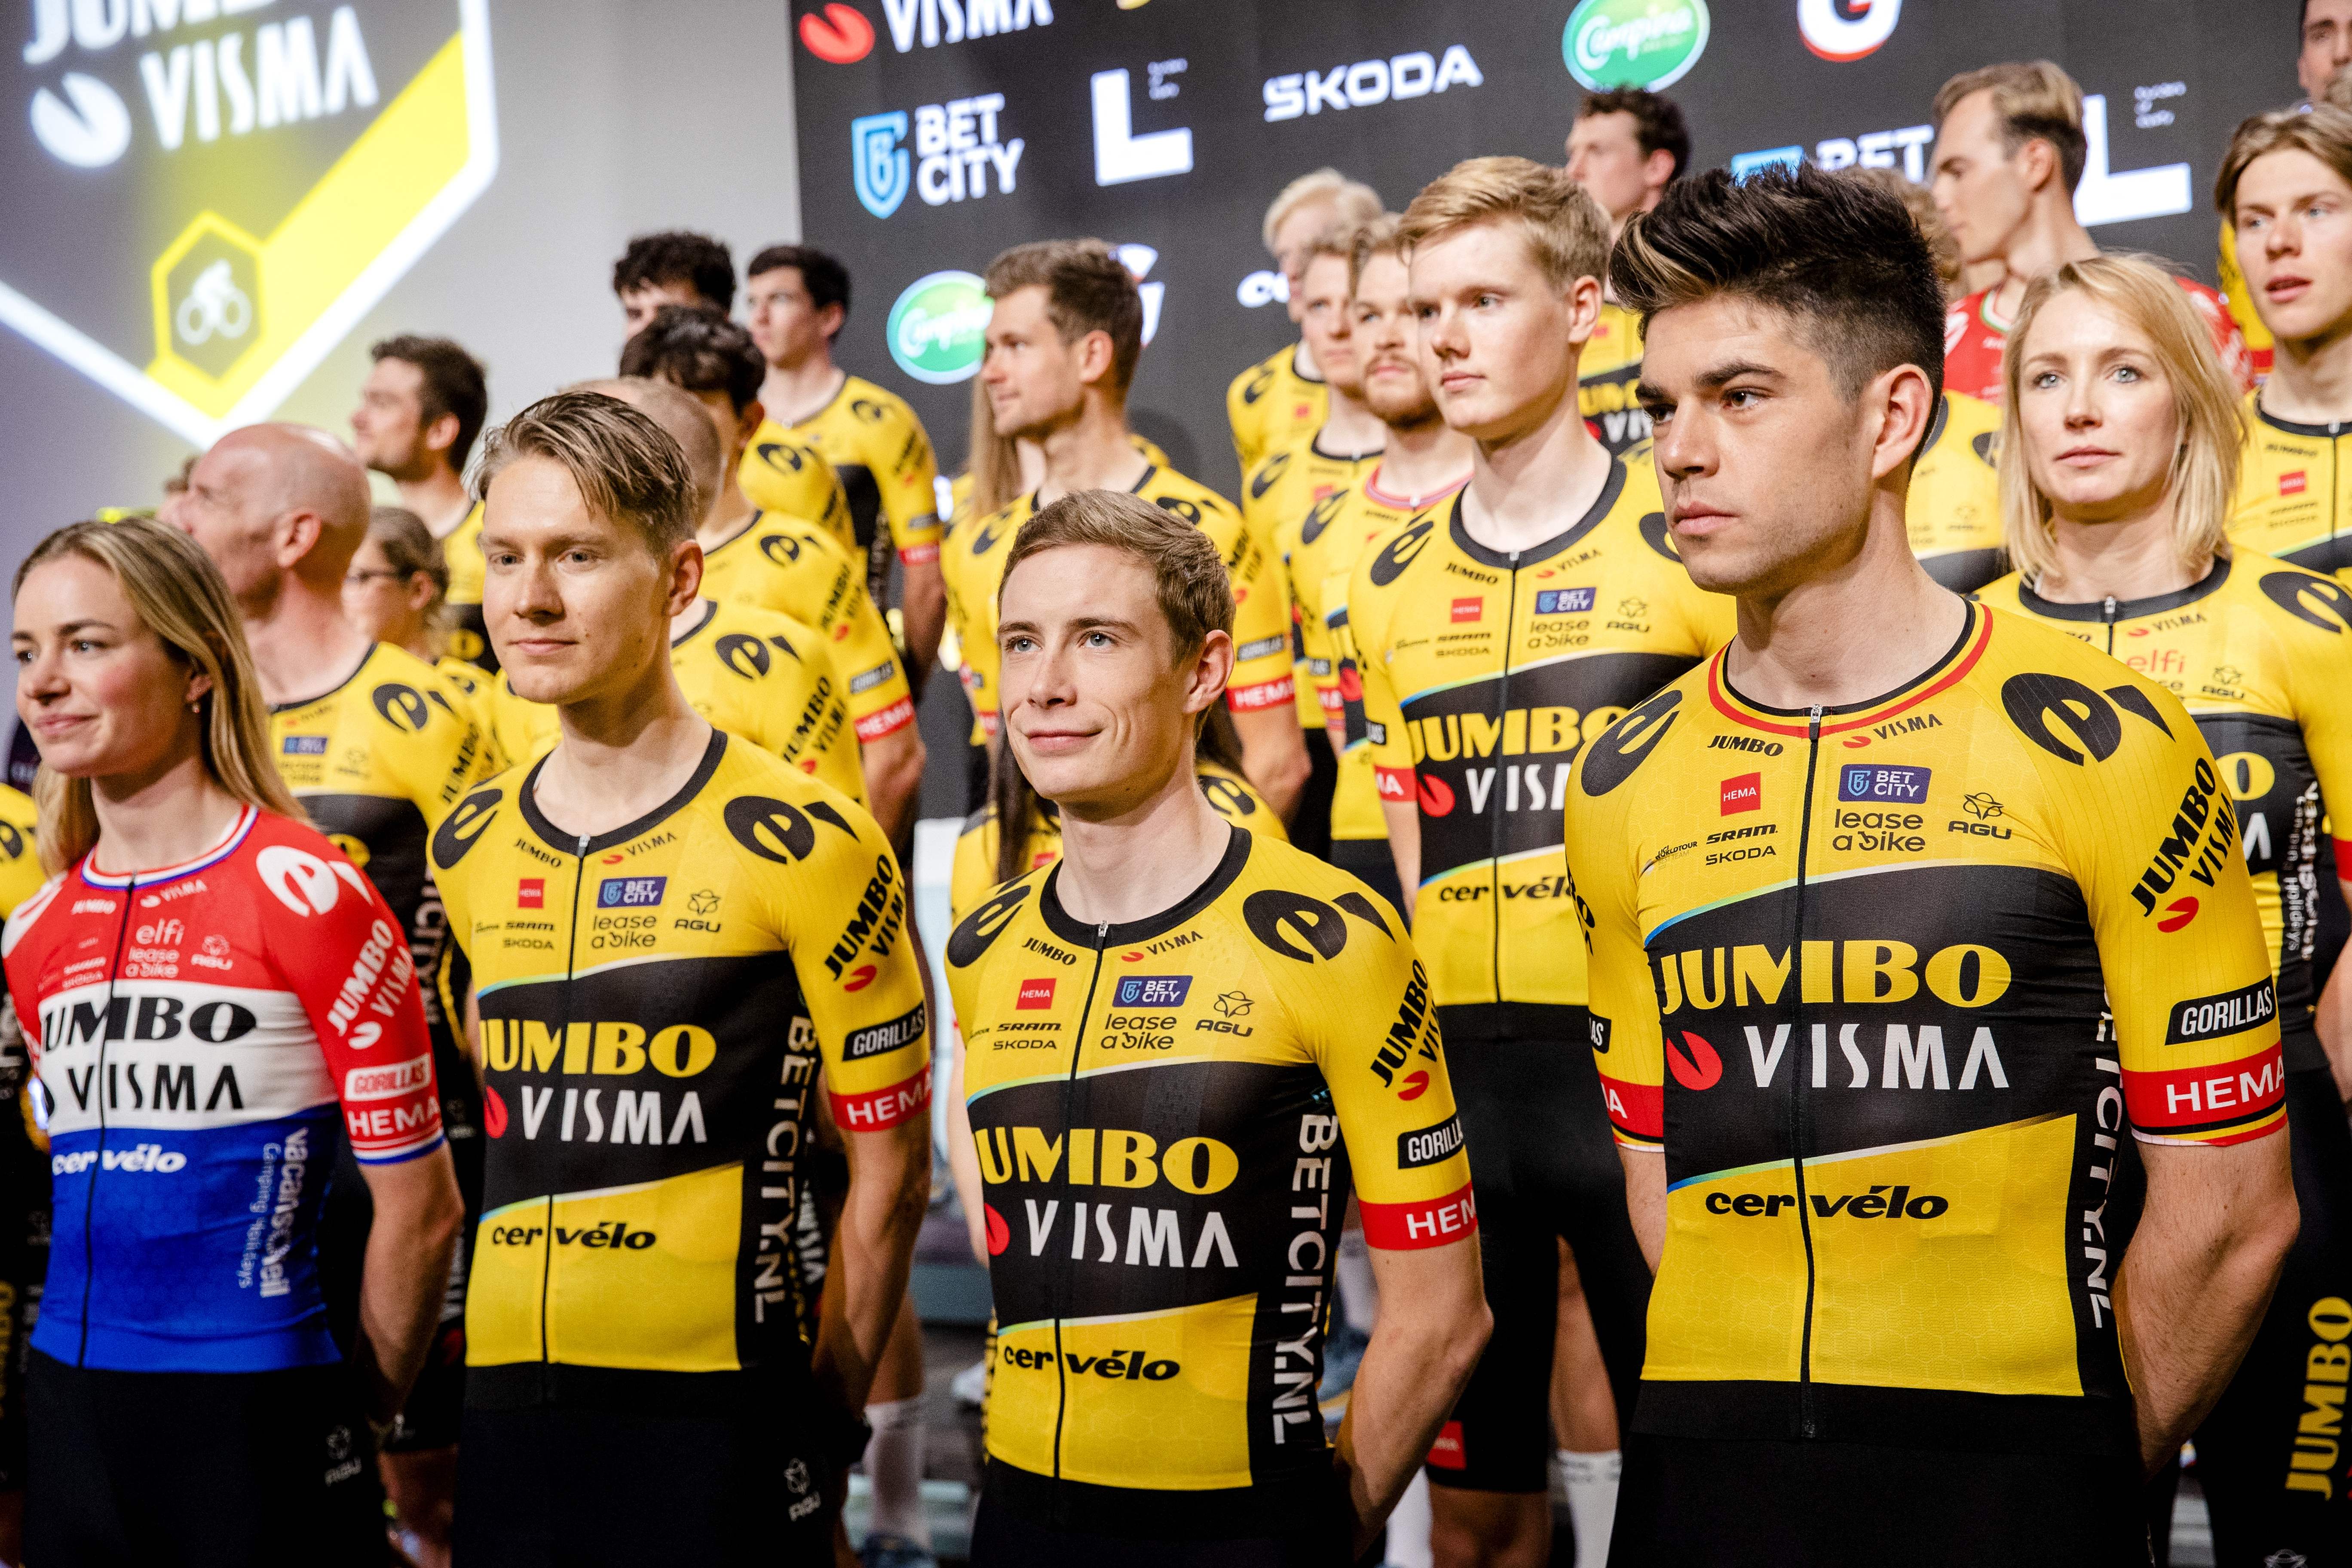 Jumbo to end title sponsorship of all Jumbo-Visma teams after 2024,  according to reports